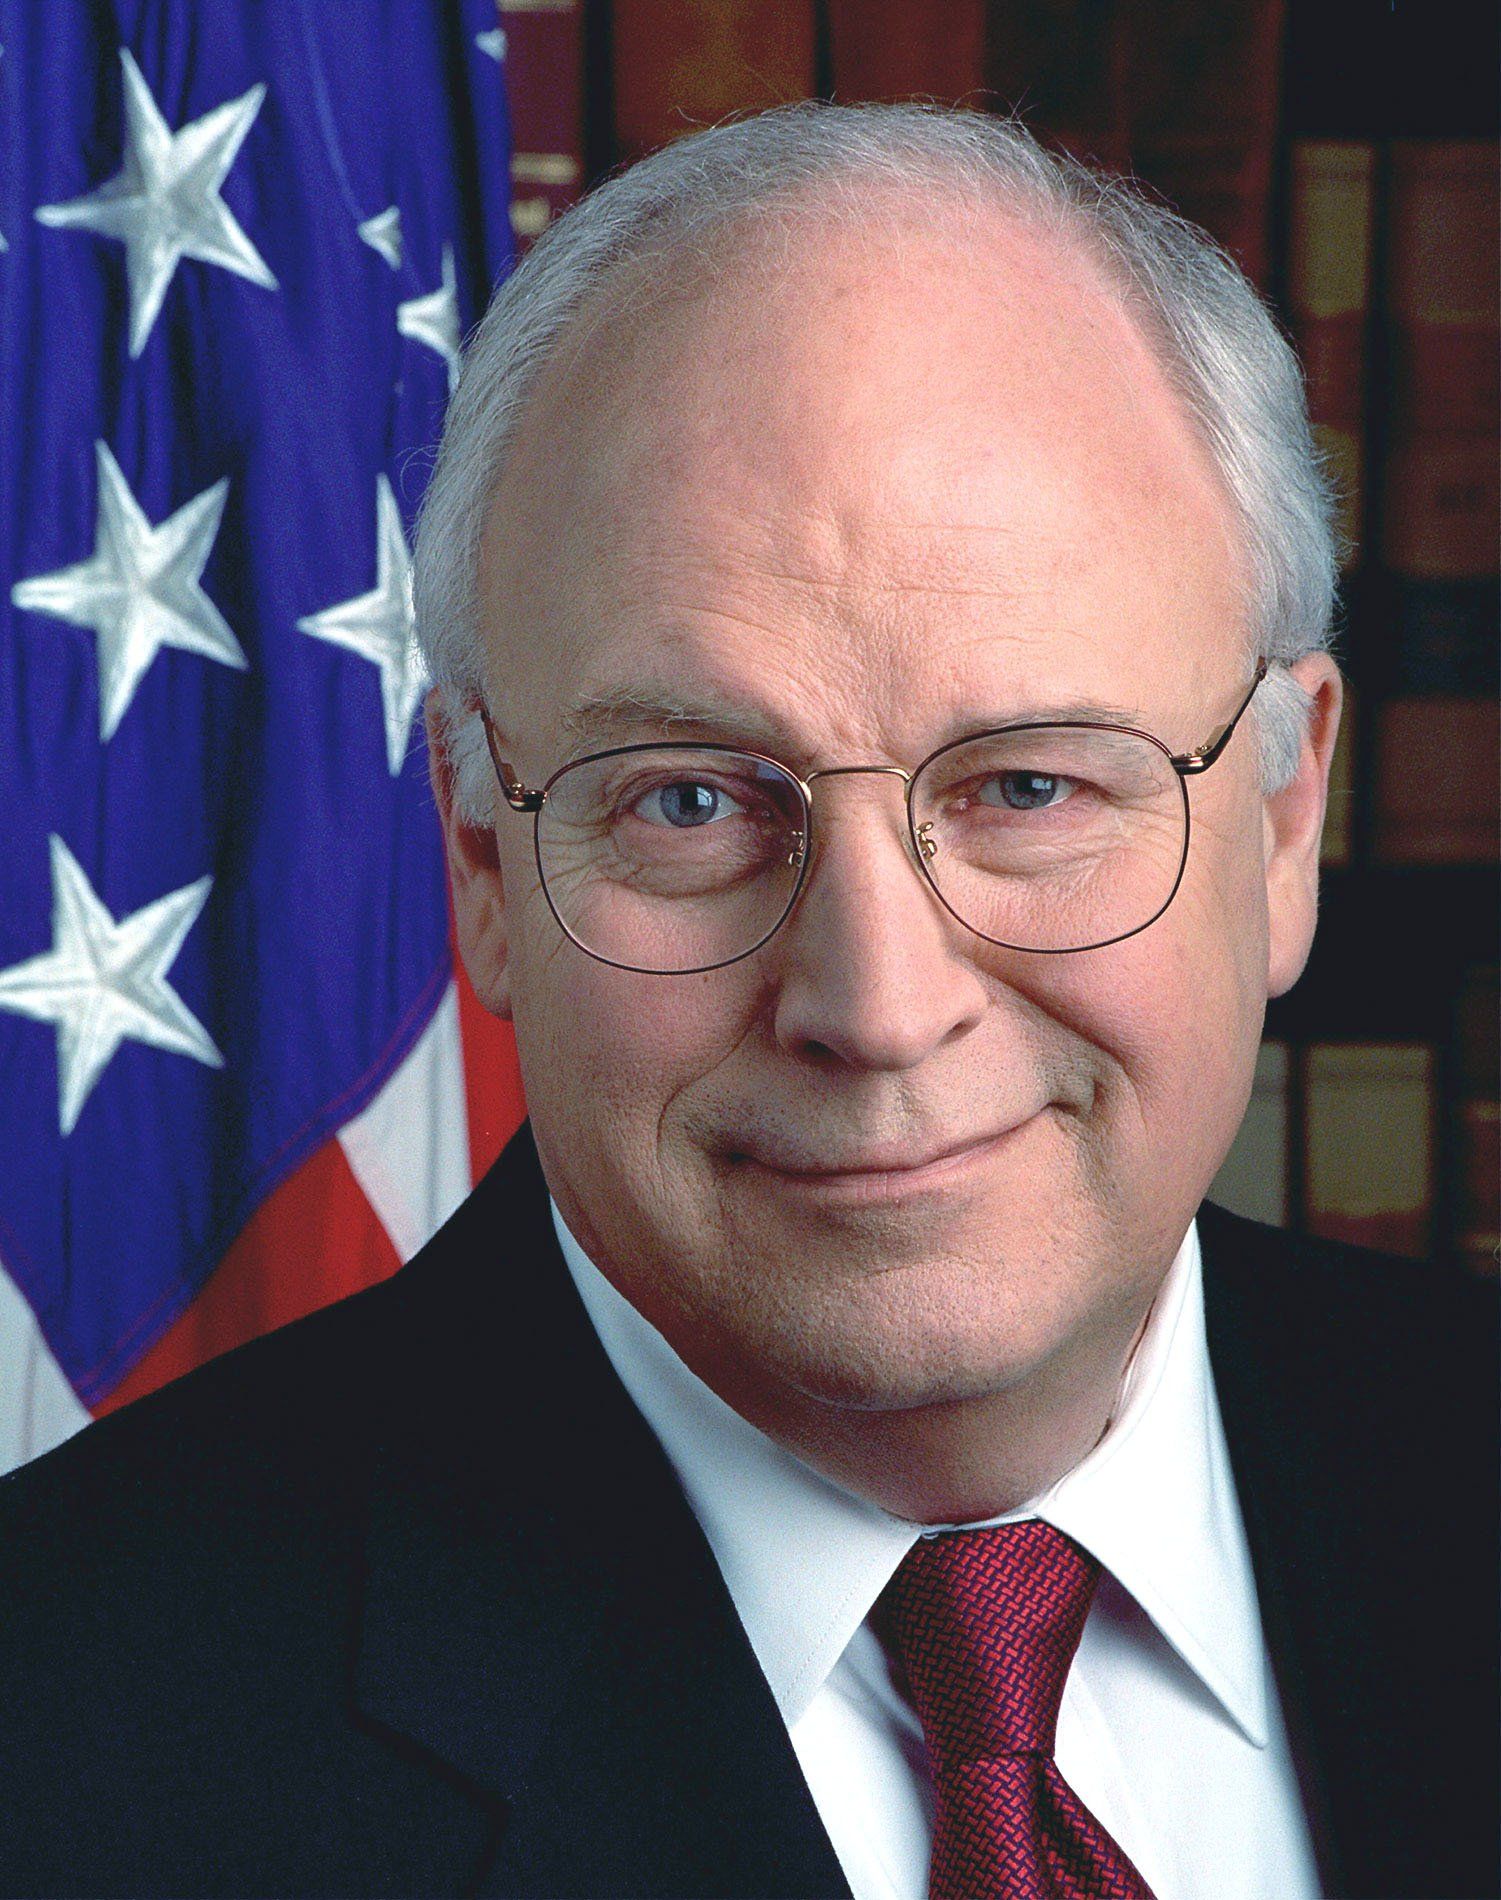 Dick cheney and reagan administration